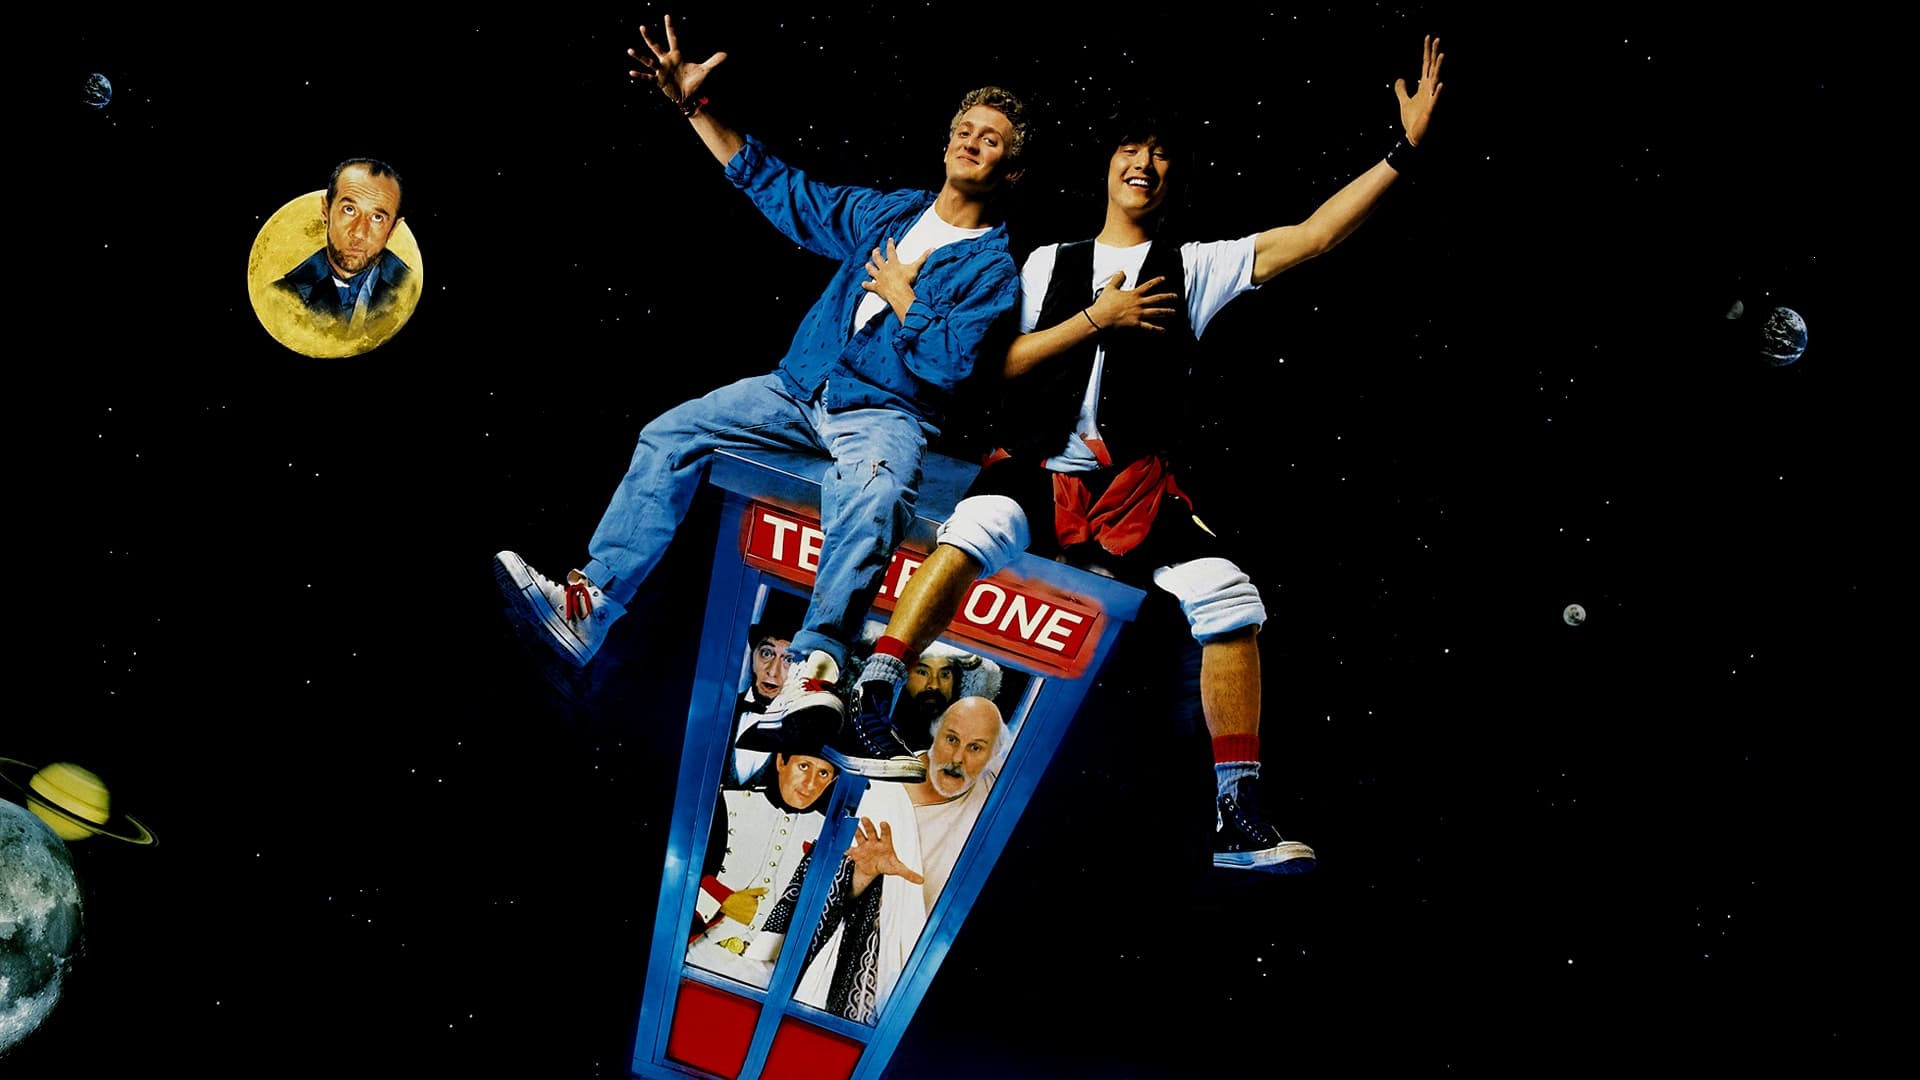 Bill & Ted 4